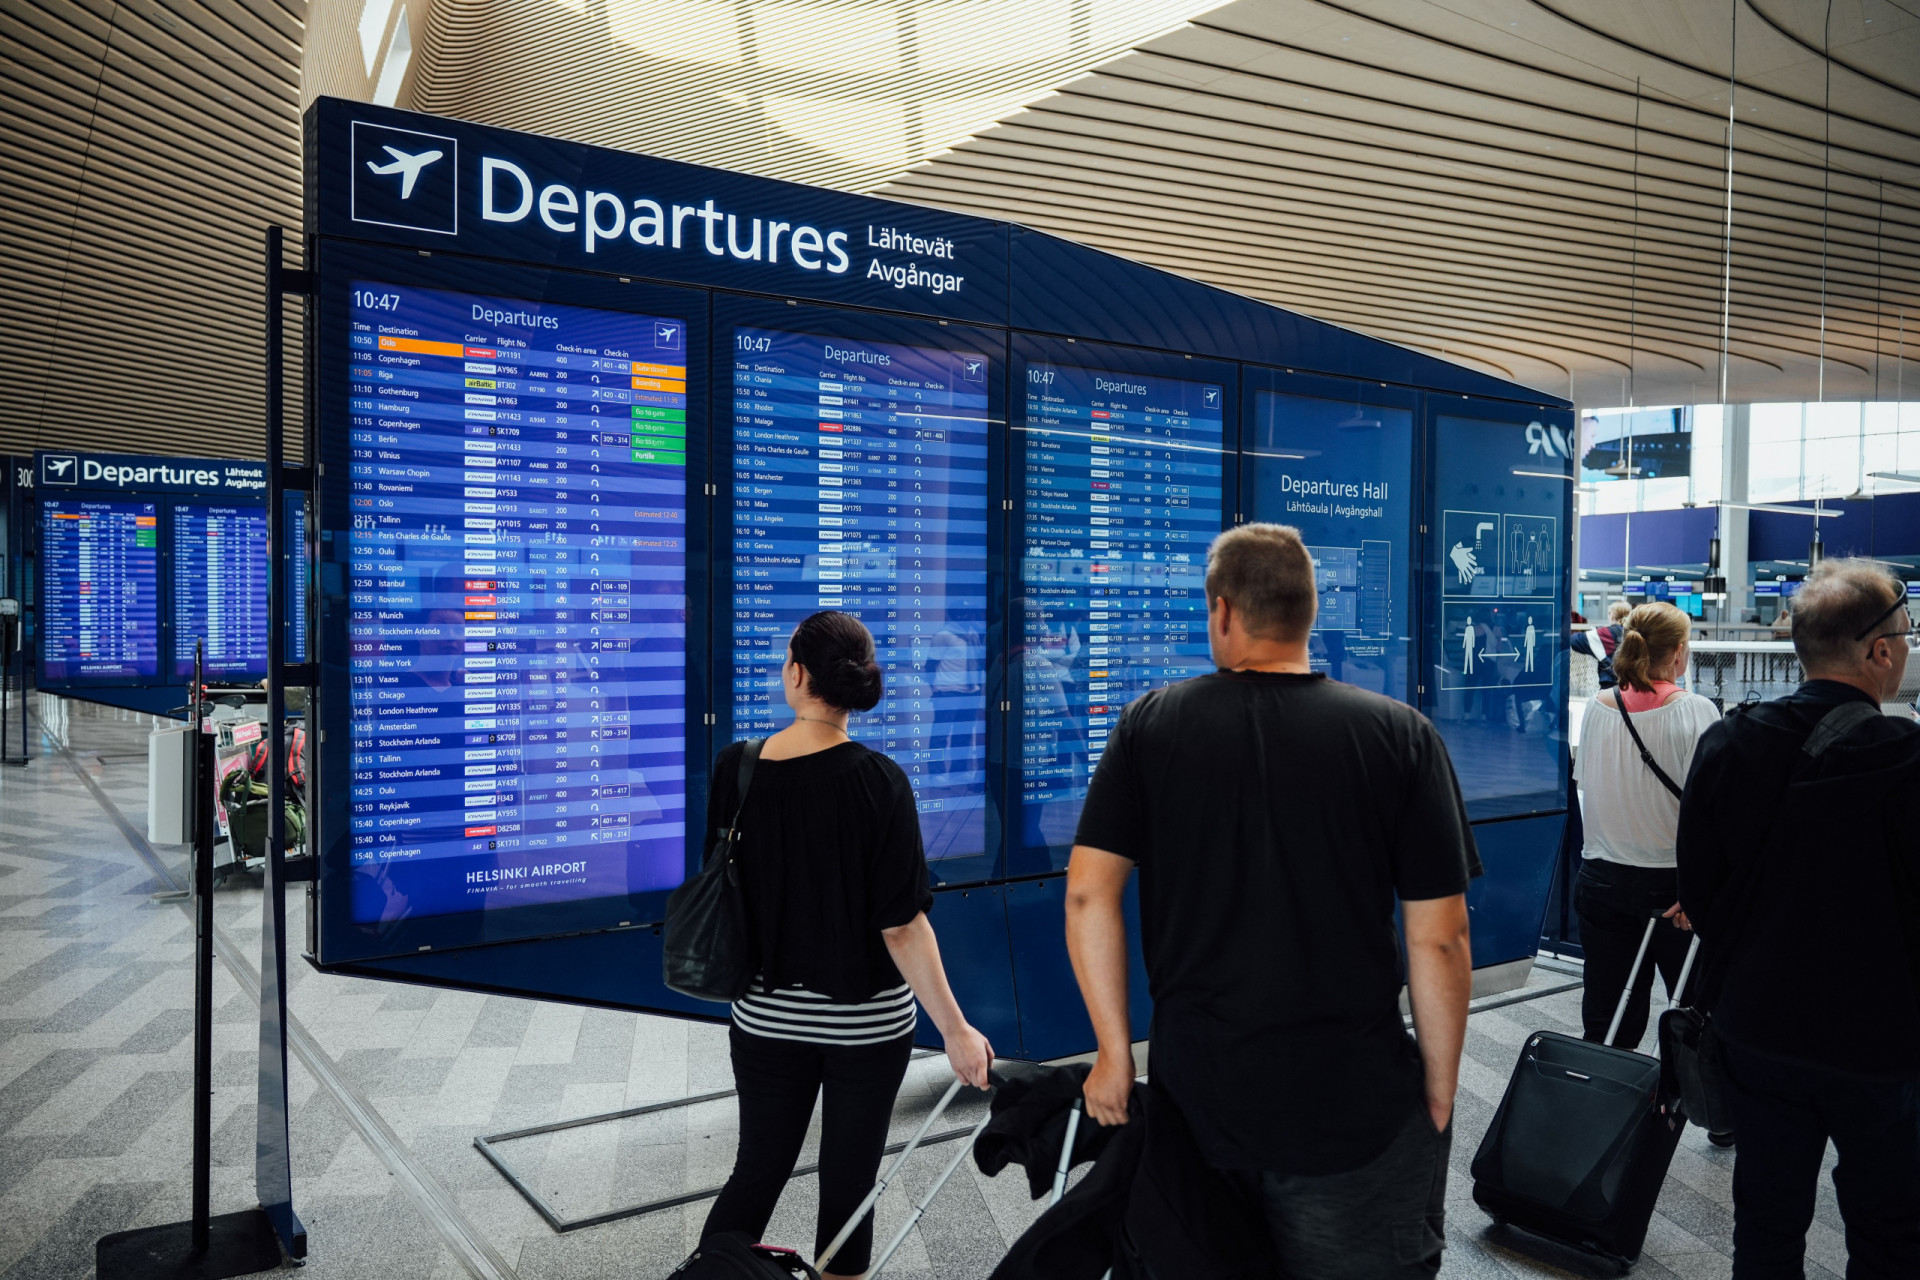 <p>While business class offers high-ranking services and amenities in the skies, <a href="https://www.starsinsider.com/travel/505384/ways-to-kill-time-at-the-airport" rel="noopener">airports</a> themselves can be daunting environments. Managed by various entities and catering to a diverse clientele, these travel hubs very often prioritize functionality over comfort. To shed light on airport experiences, BusinessFinancing.co.uk conducted a comprehensive study of the best and worst airports around the world based on business travelers' reviews. Spoiler alert: the majority of the most poorly ranked airports are located in the US and the UK!</p> <p>Curious? Click on to discover the best and worst airports in the world.</p><p>You may also like:<a href="https://www.starsinsider.com/n/198574?utm_source=msn.com&utm_medium=display&utm_campaign=referral_description&utm_content=696237en-ph"> What's new on Netflix UK in April</a></p>